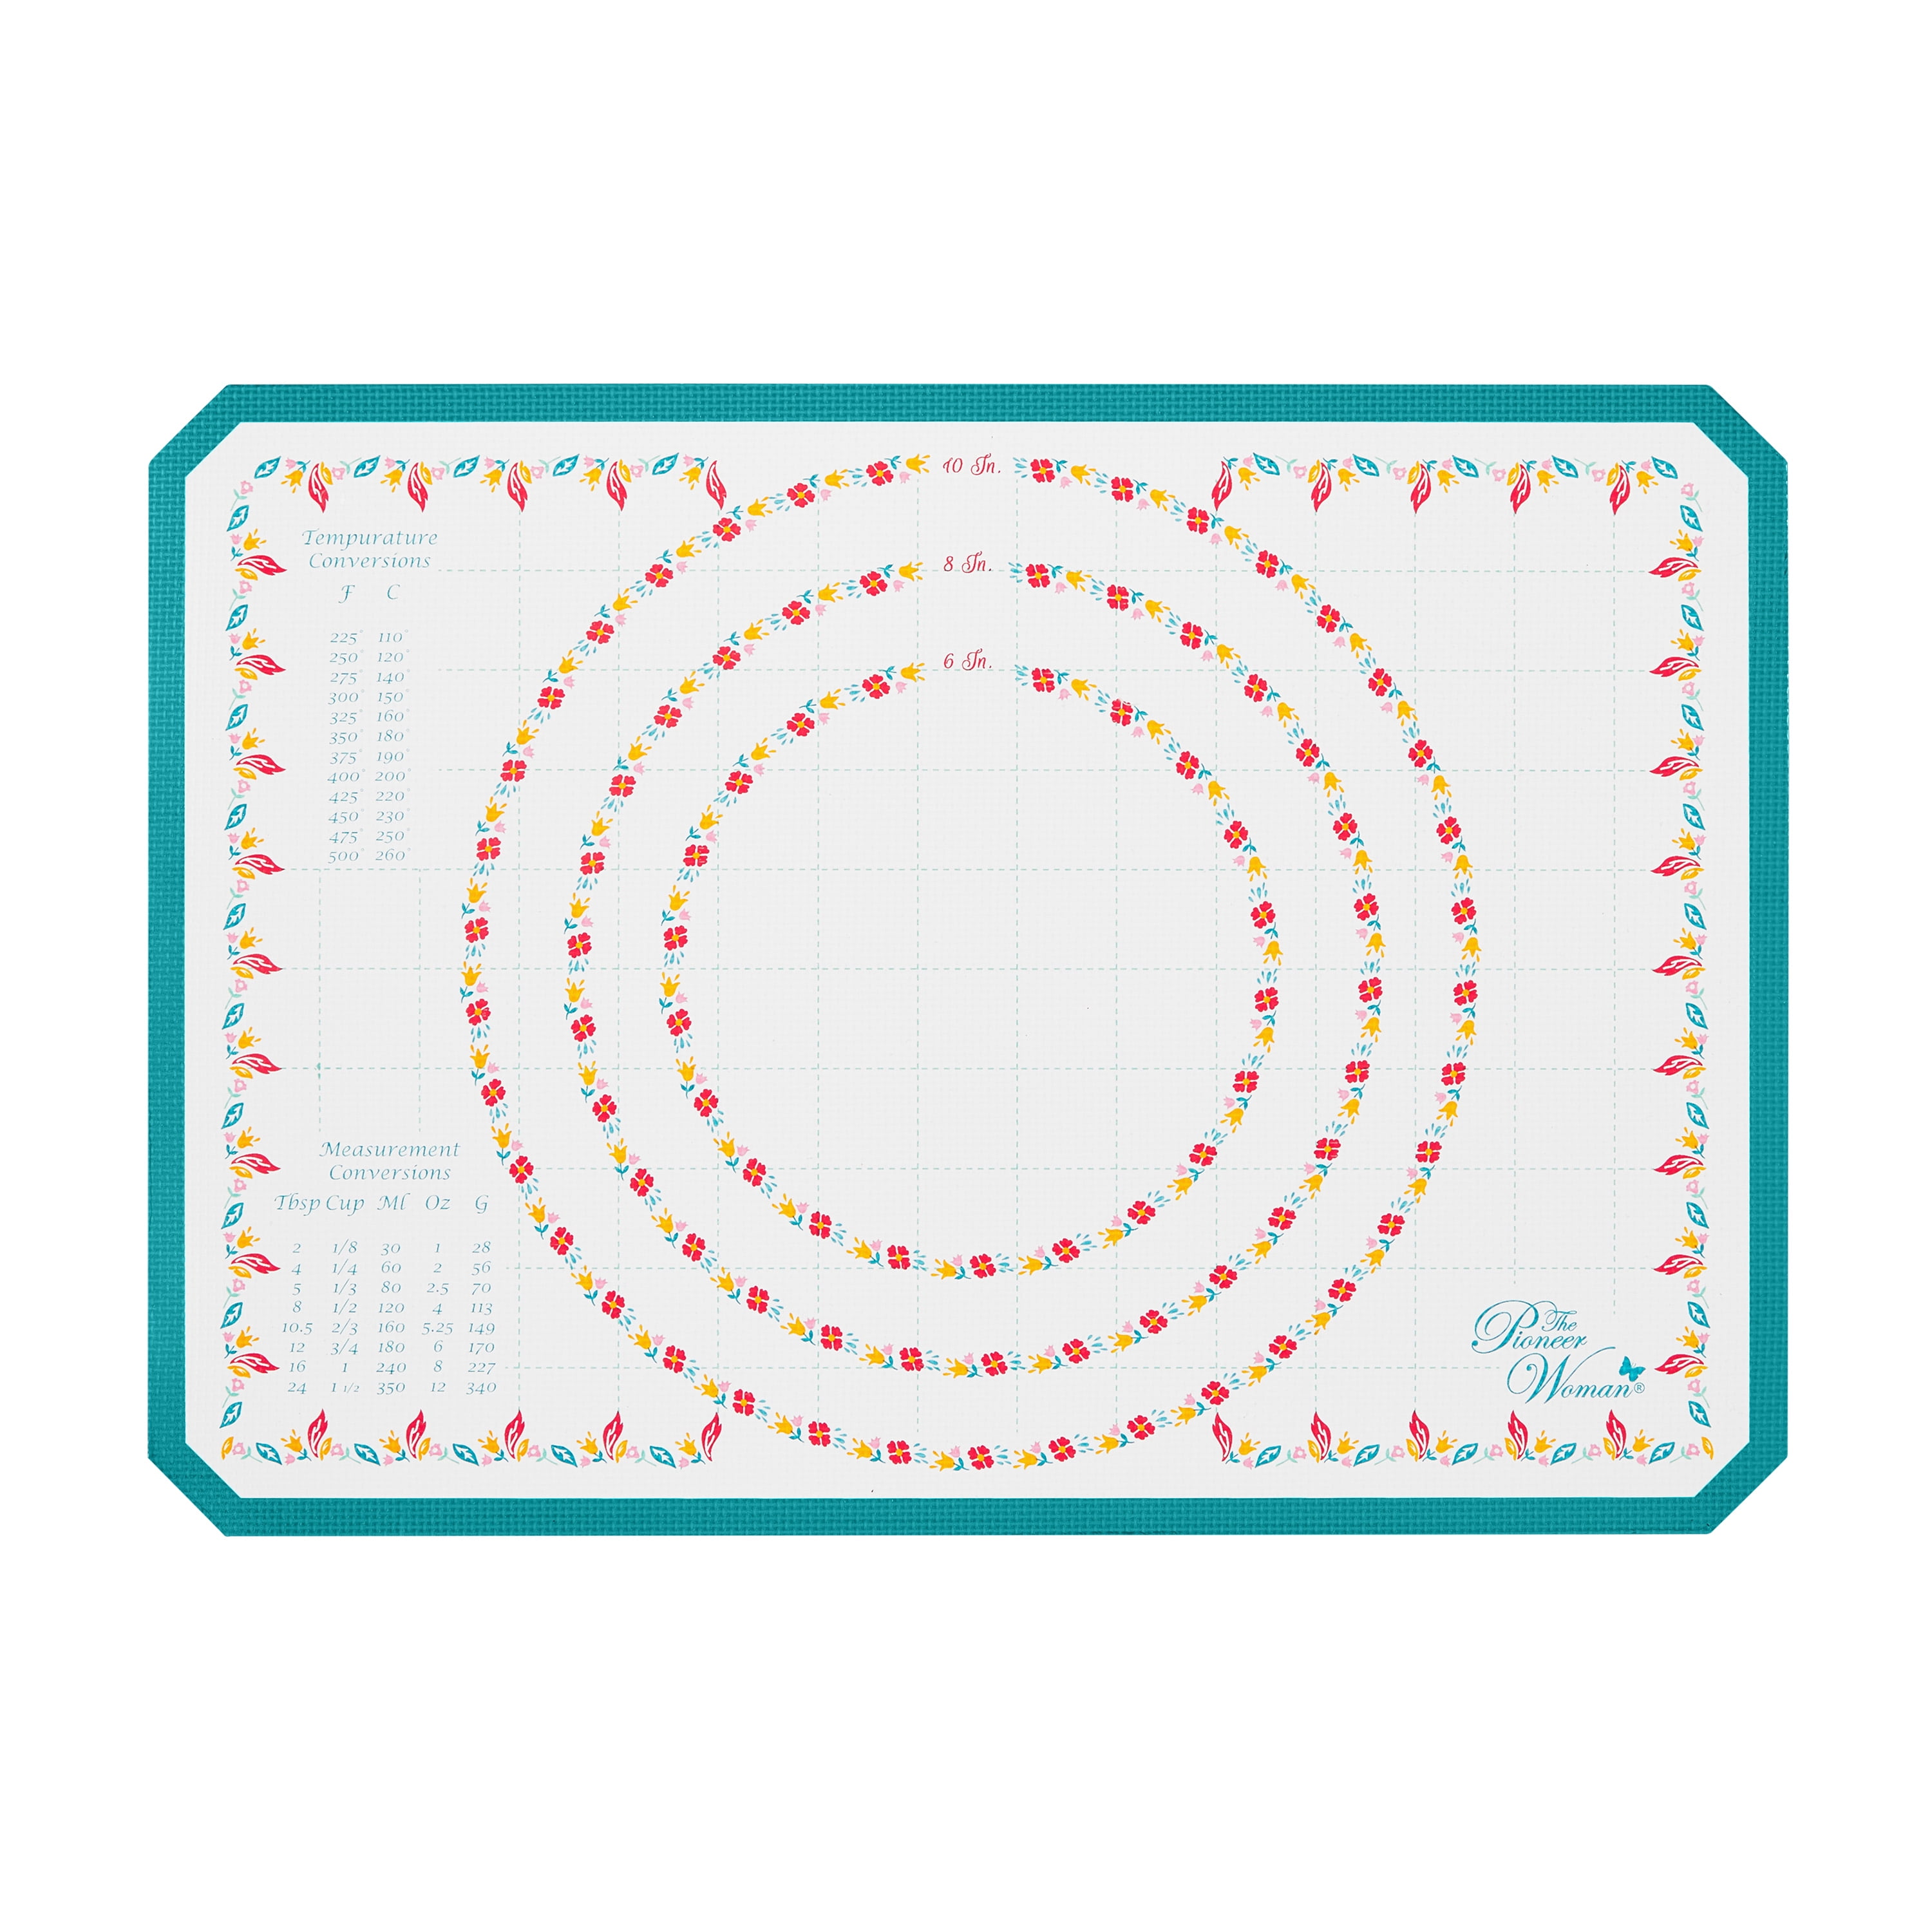 Mainstays Reusable Silicone 24x 16 Pastry Mat with Measurements